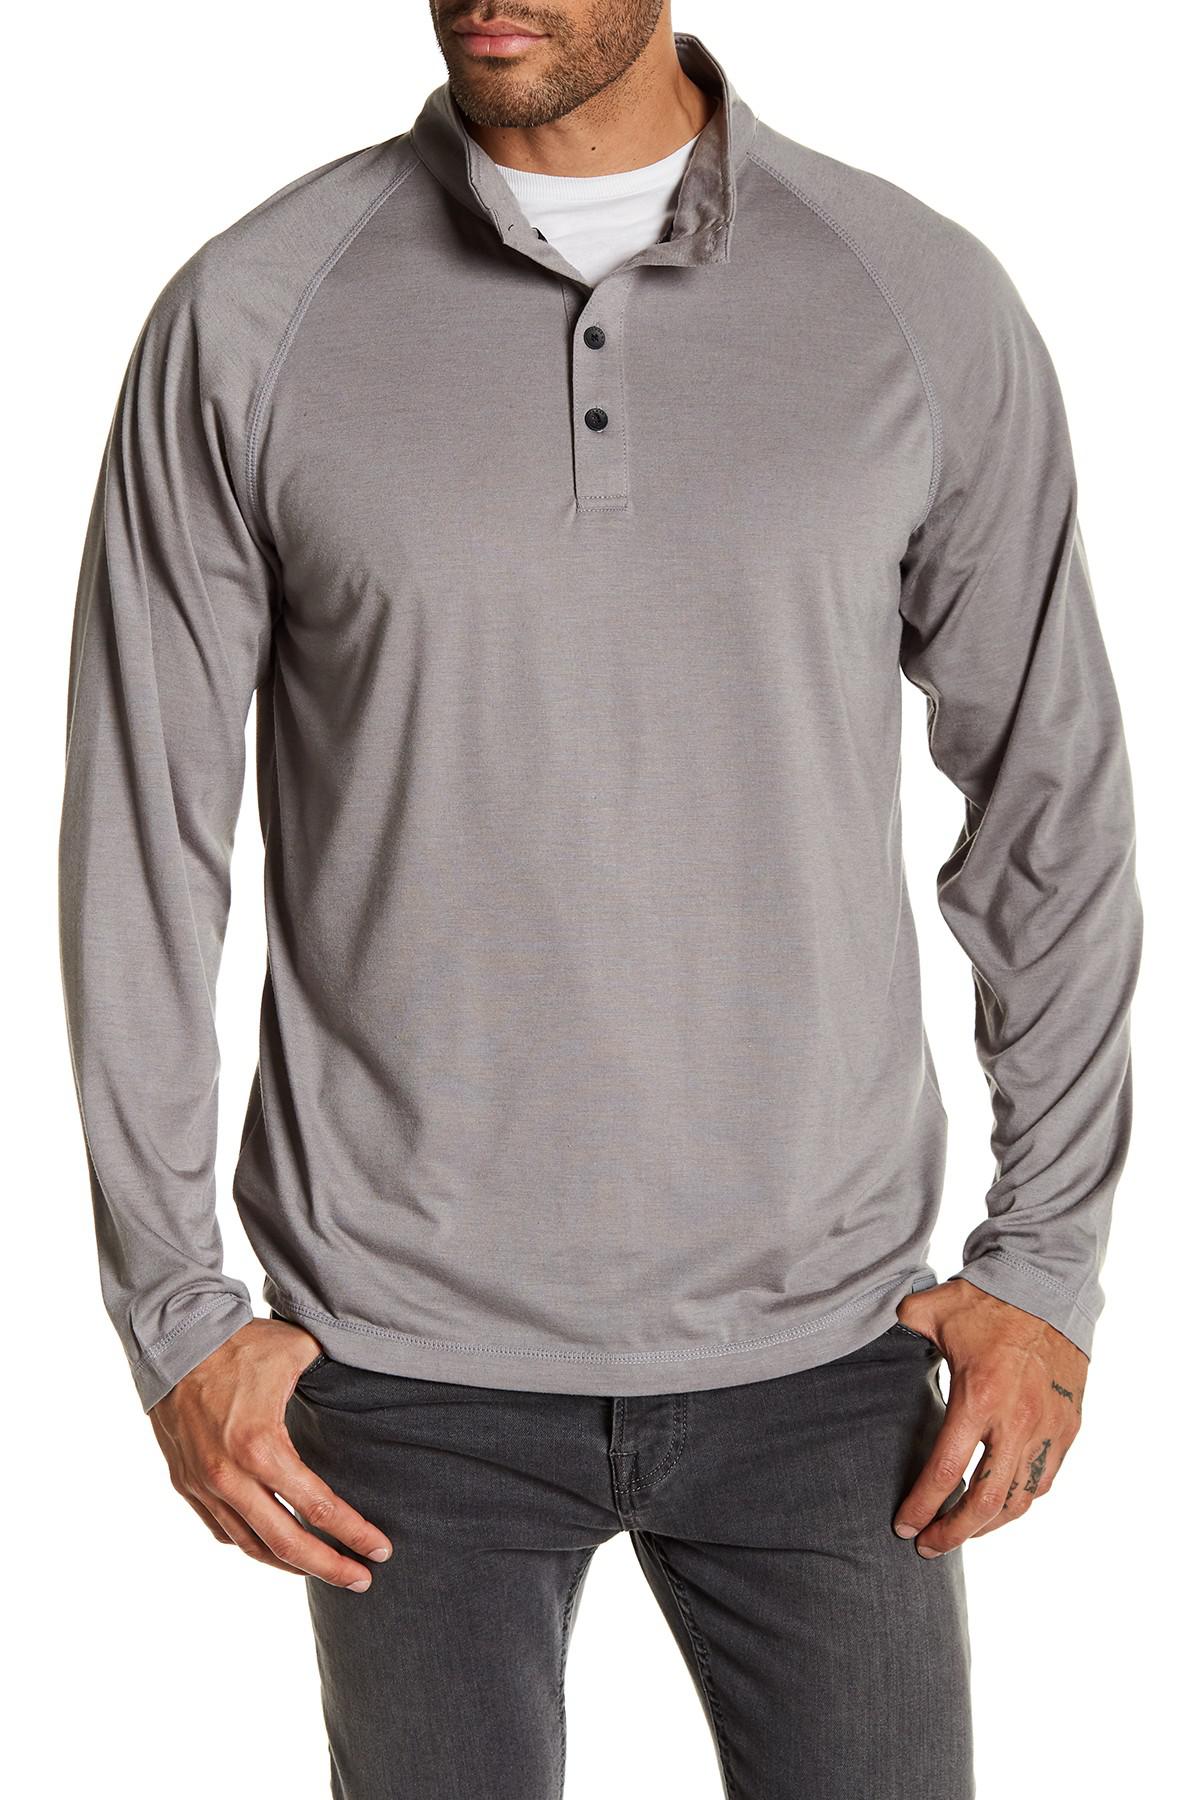 Lyst - Hawke & co. Partial Button-up Long Sleeve Shirt in Gray for Men